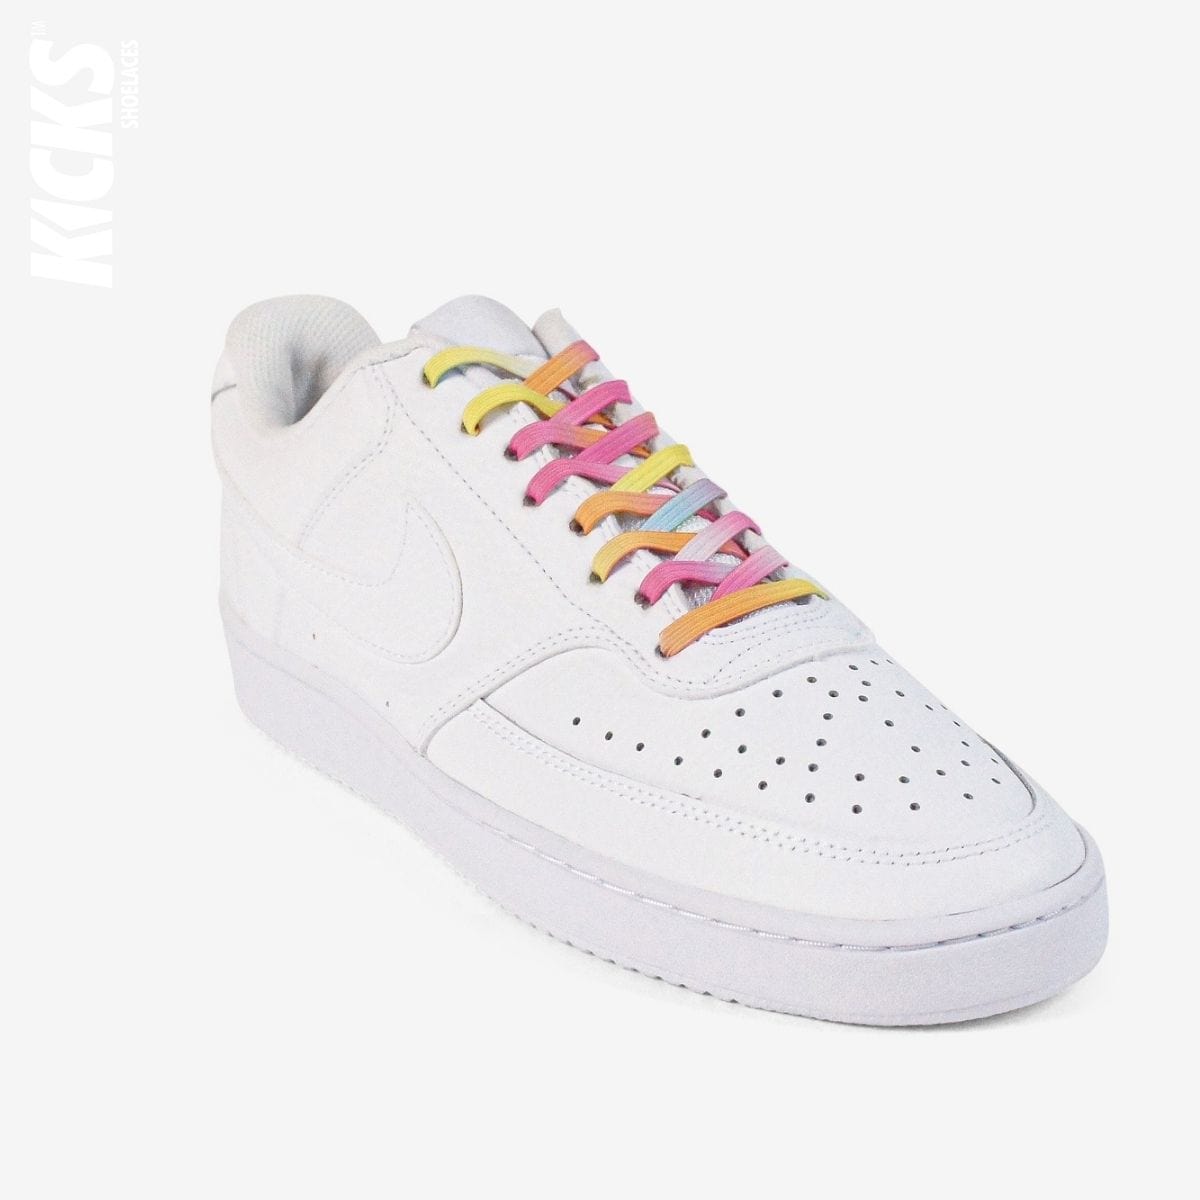 elastic-no-tie-shoelaces-with-pink-ombre-laces-on-nike-white-sneakers